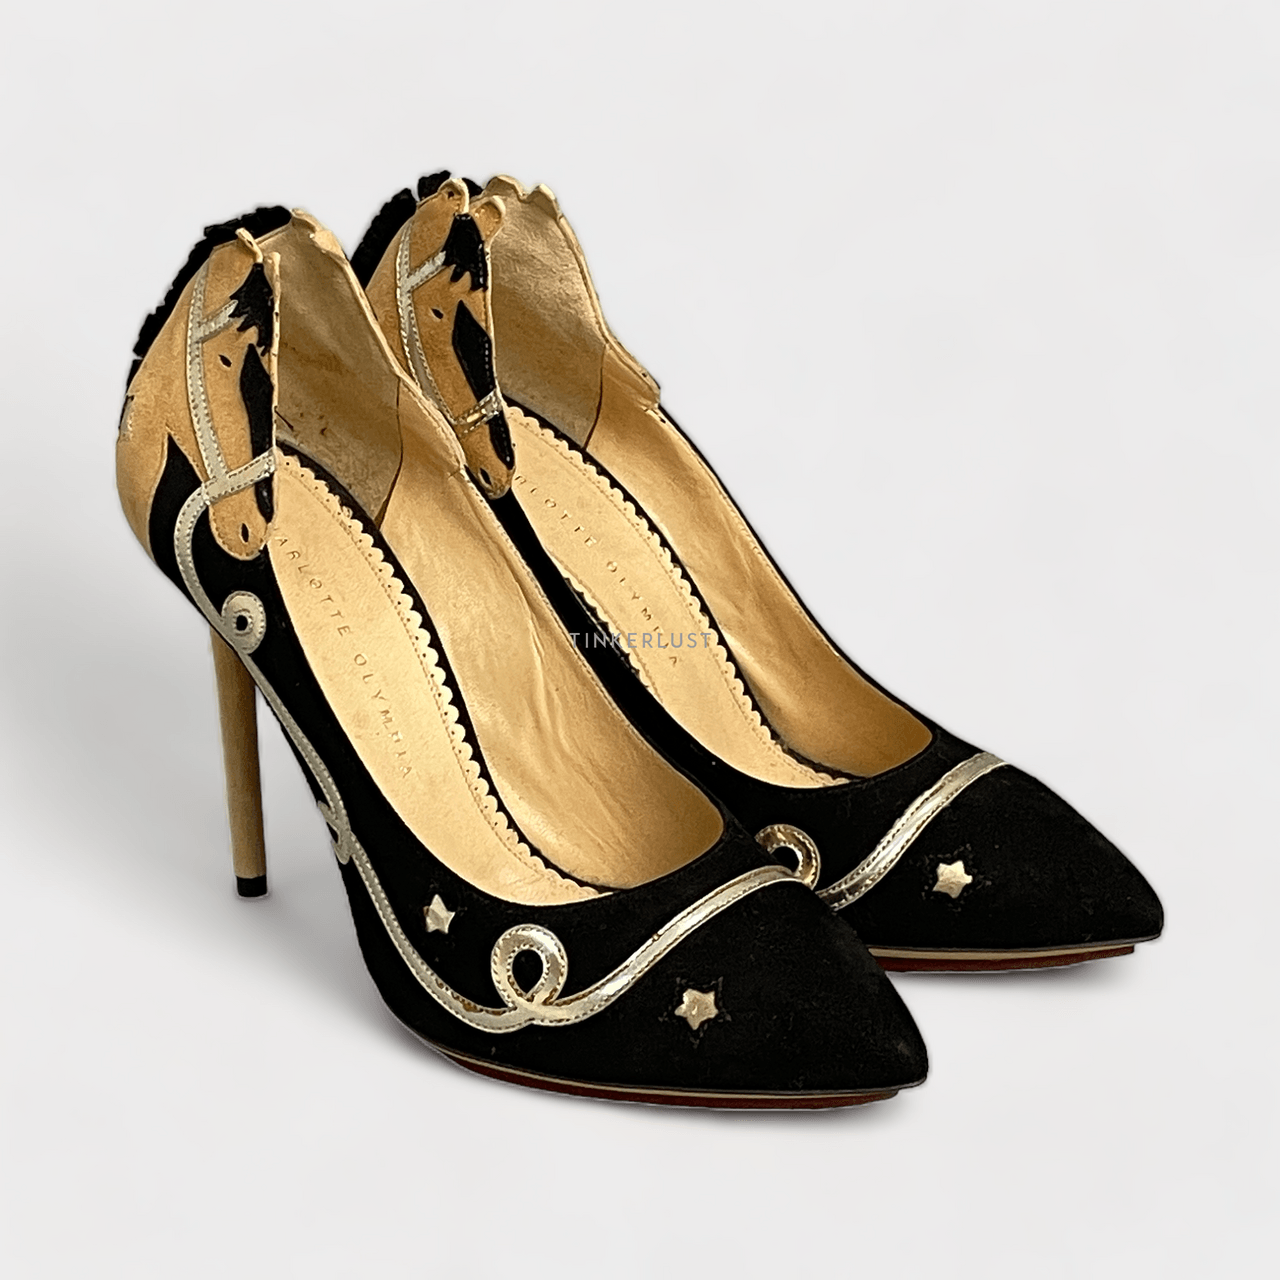 Charlotte Olympia Two Tone Suede Giddy Up Pumps Heels 